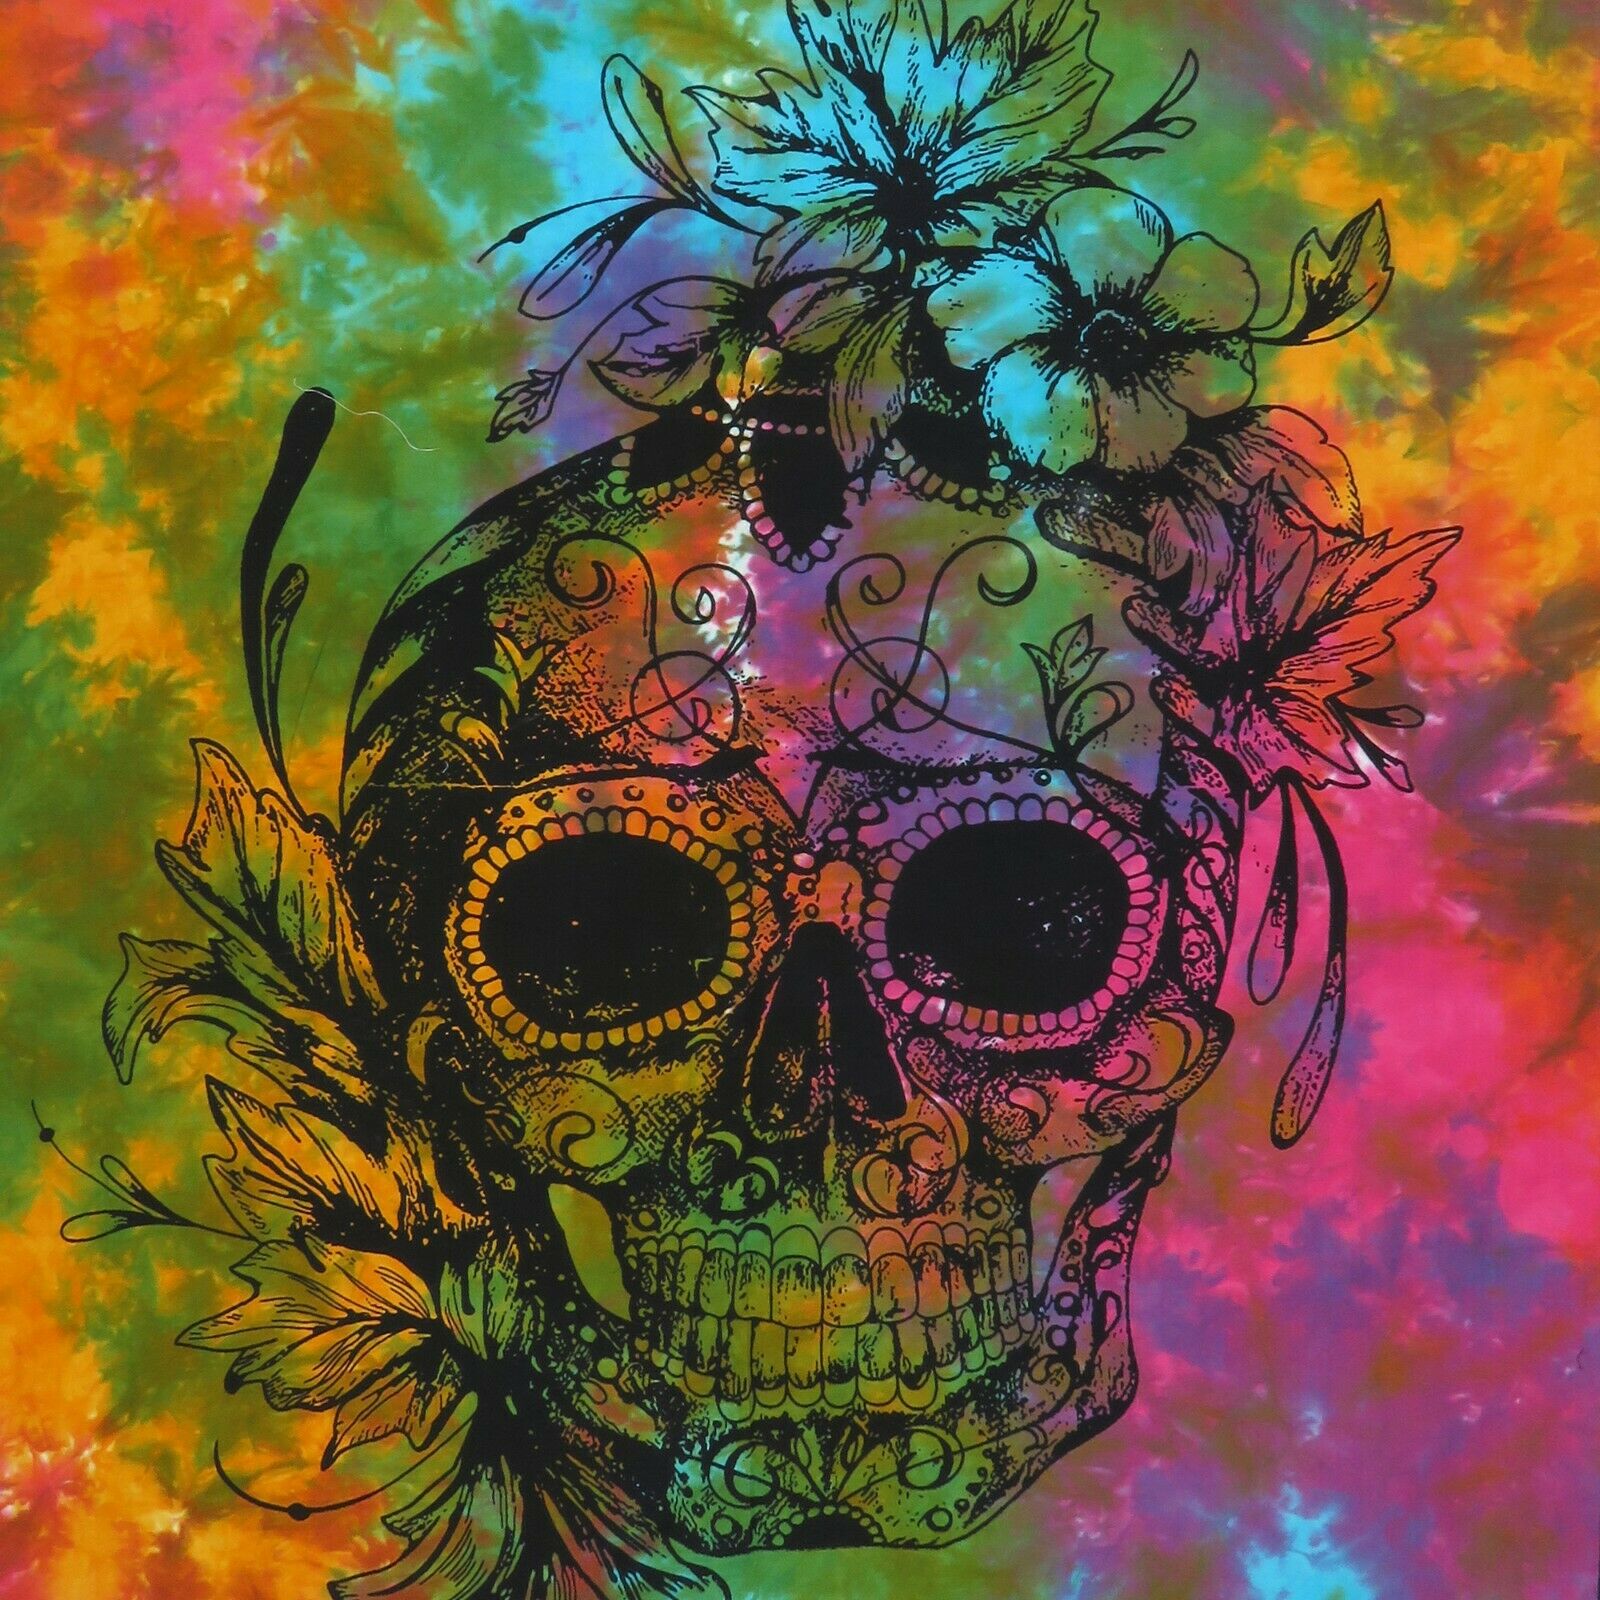 Indian Tie Dye Wall Hanging Tapestry Skull Print Cotton Poster Wall Art Decor